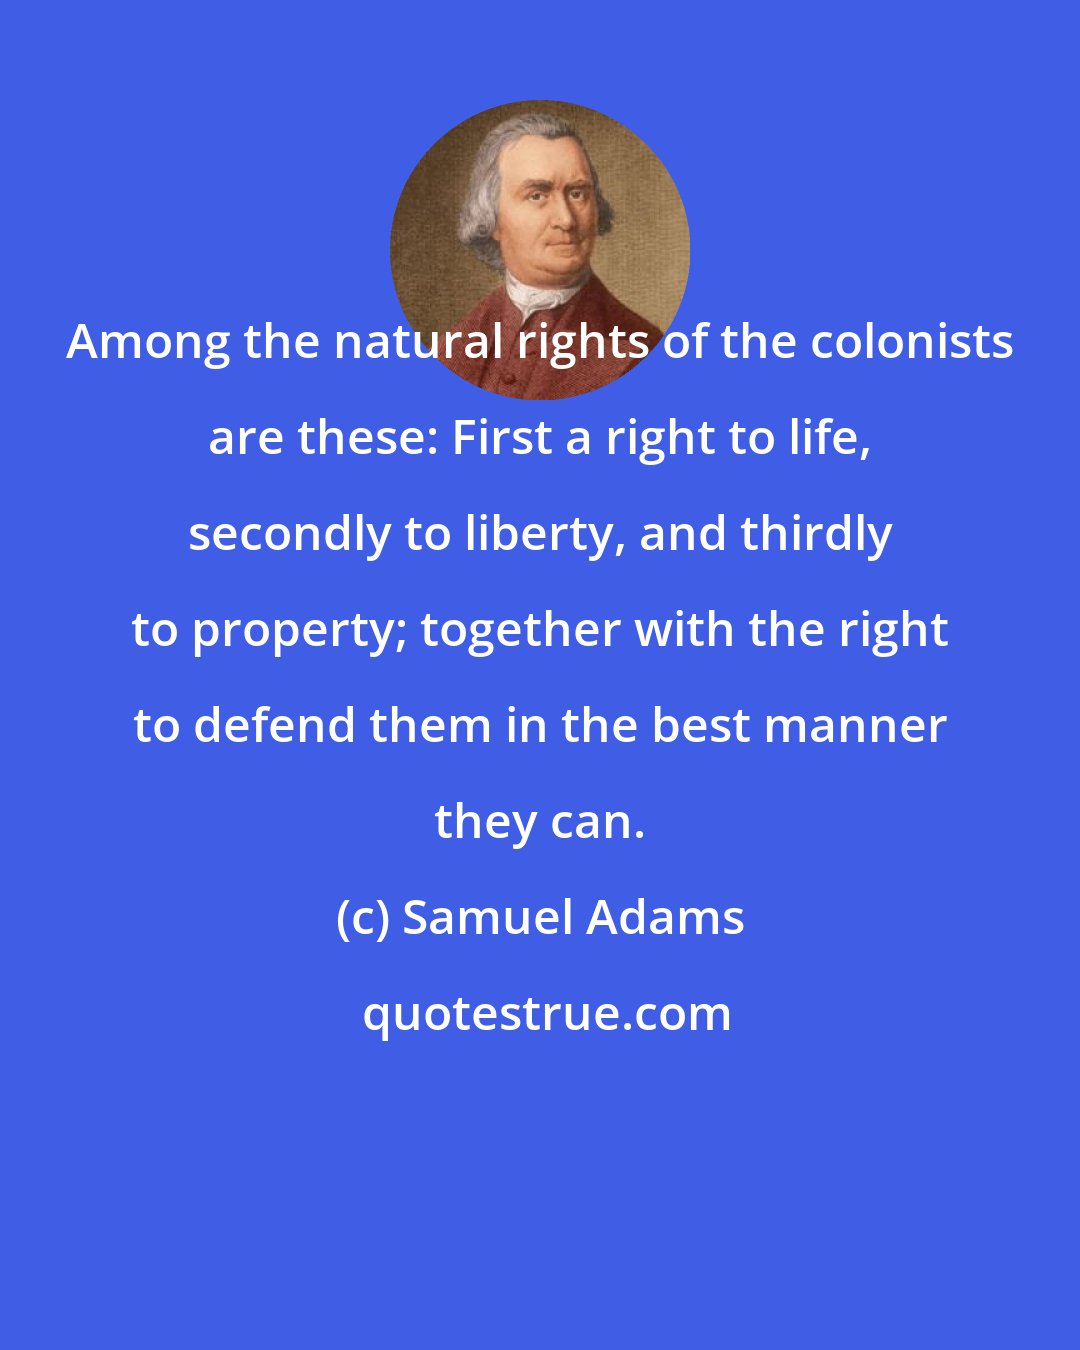 Samuel Adams: Among the natural rights of the colonists are these: First a right to life, secondly to liberty, and thirdly to property; together with the right to defend them in the best manner they can.